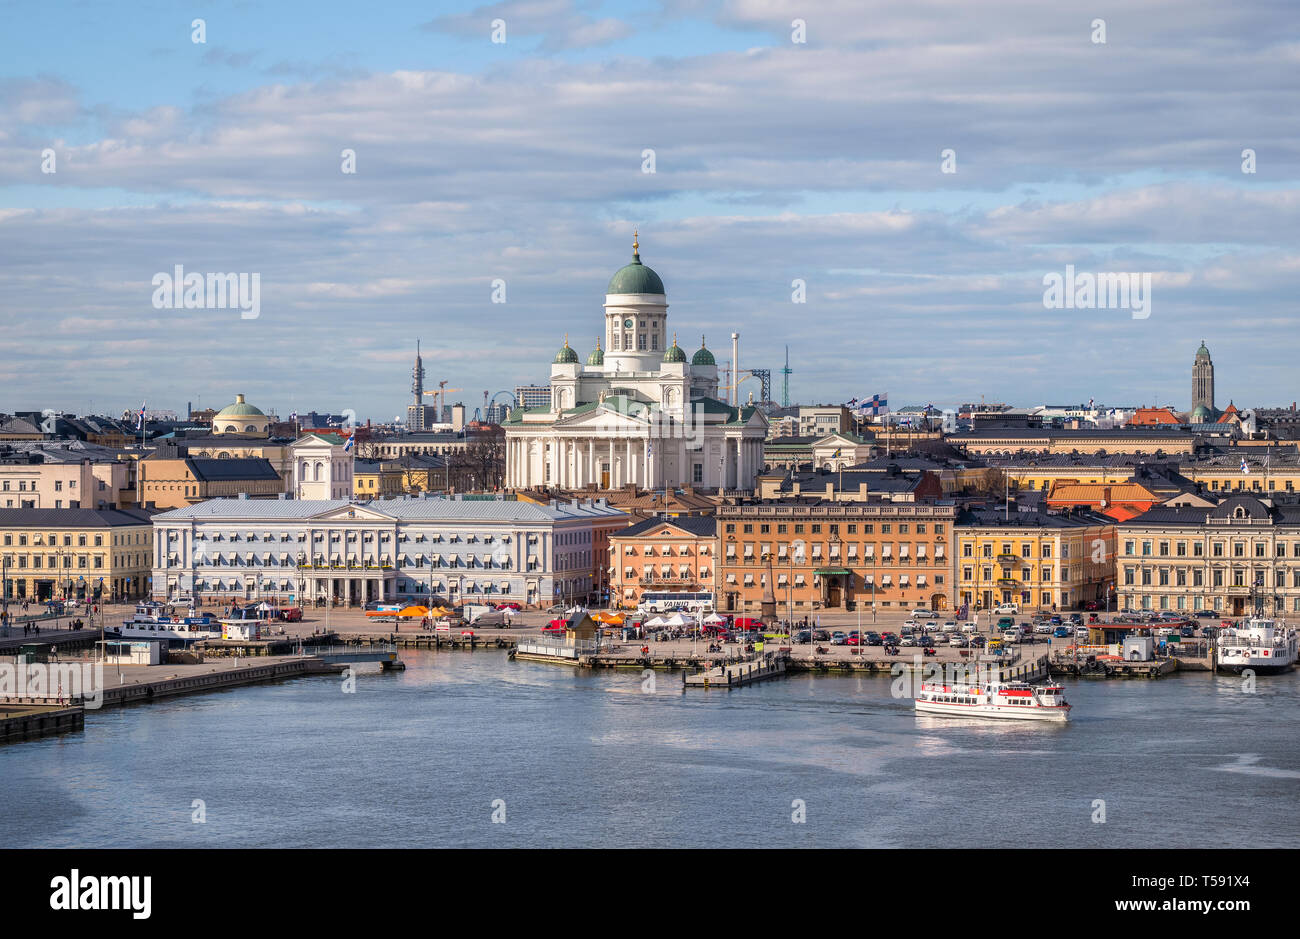 Helsinki, Finland - April 14 : Cathedral and other city buildings with central cityscape in Helsinki on April 14, 2019. With beautiful evening light. Stock Photo